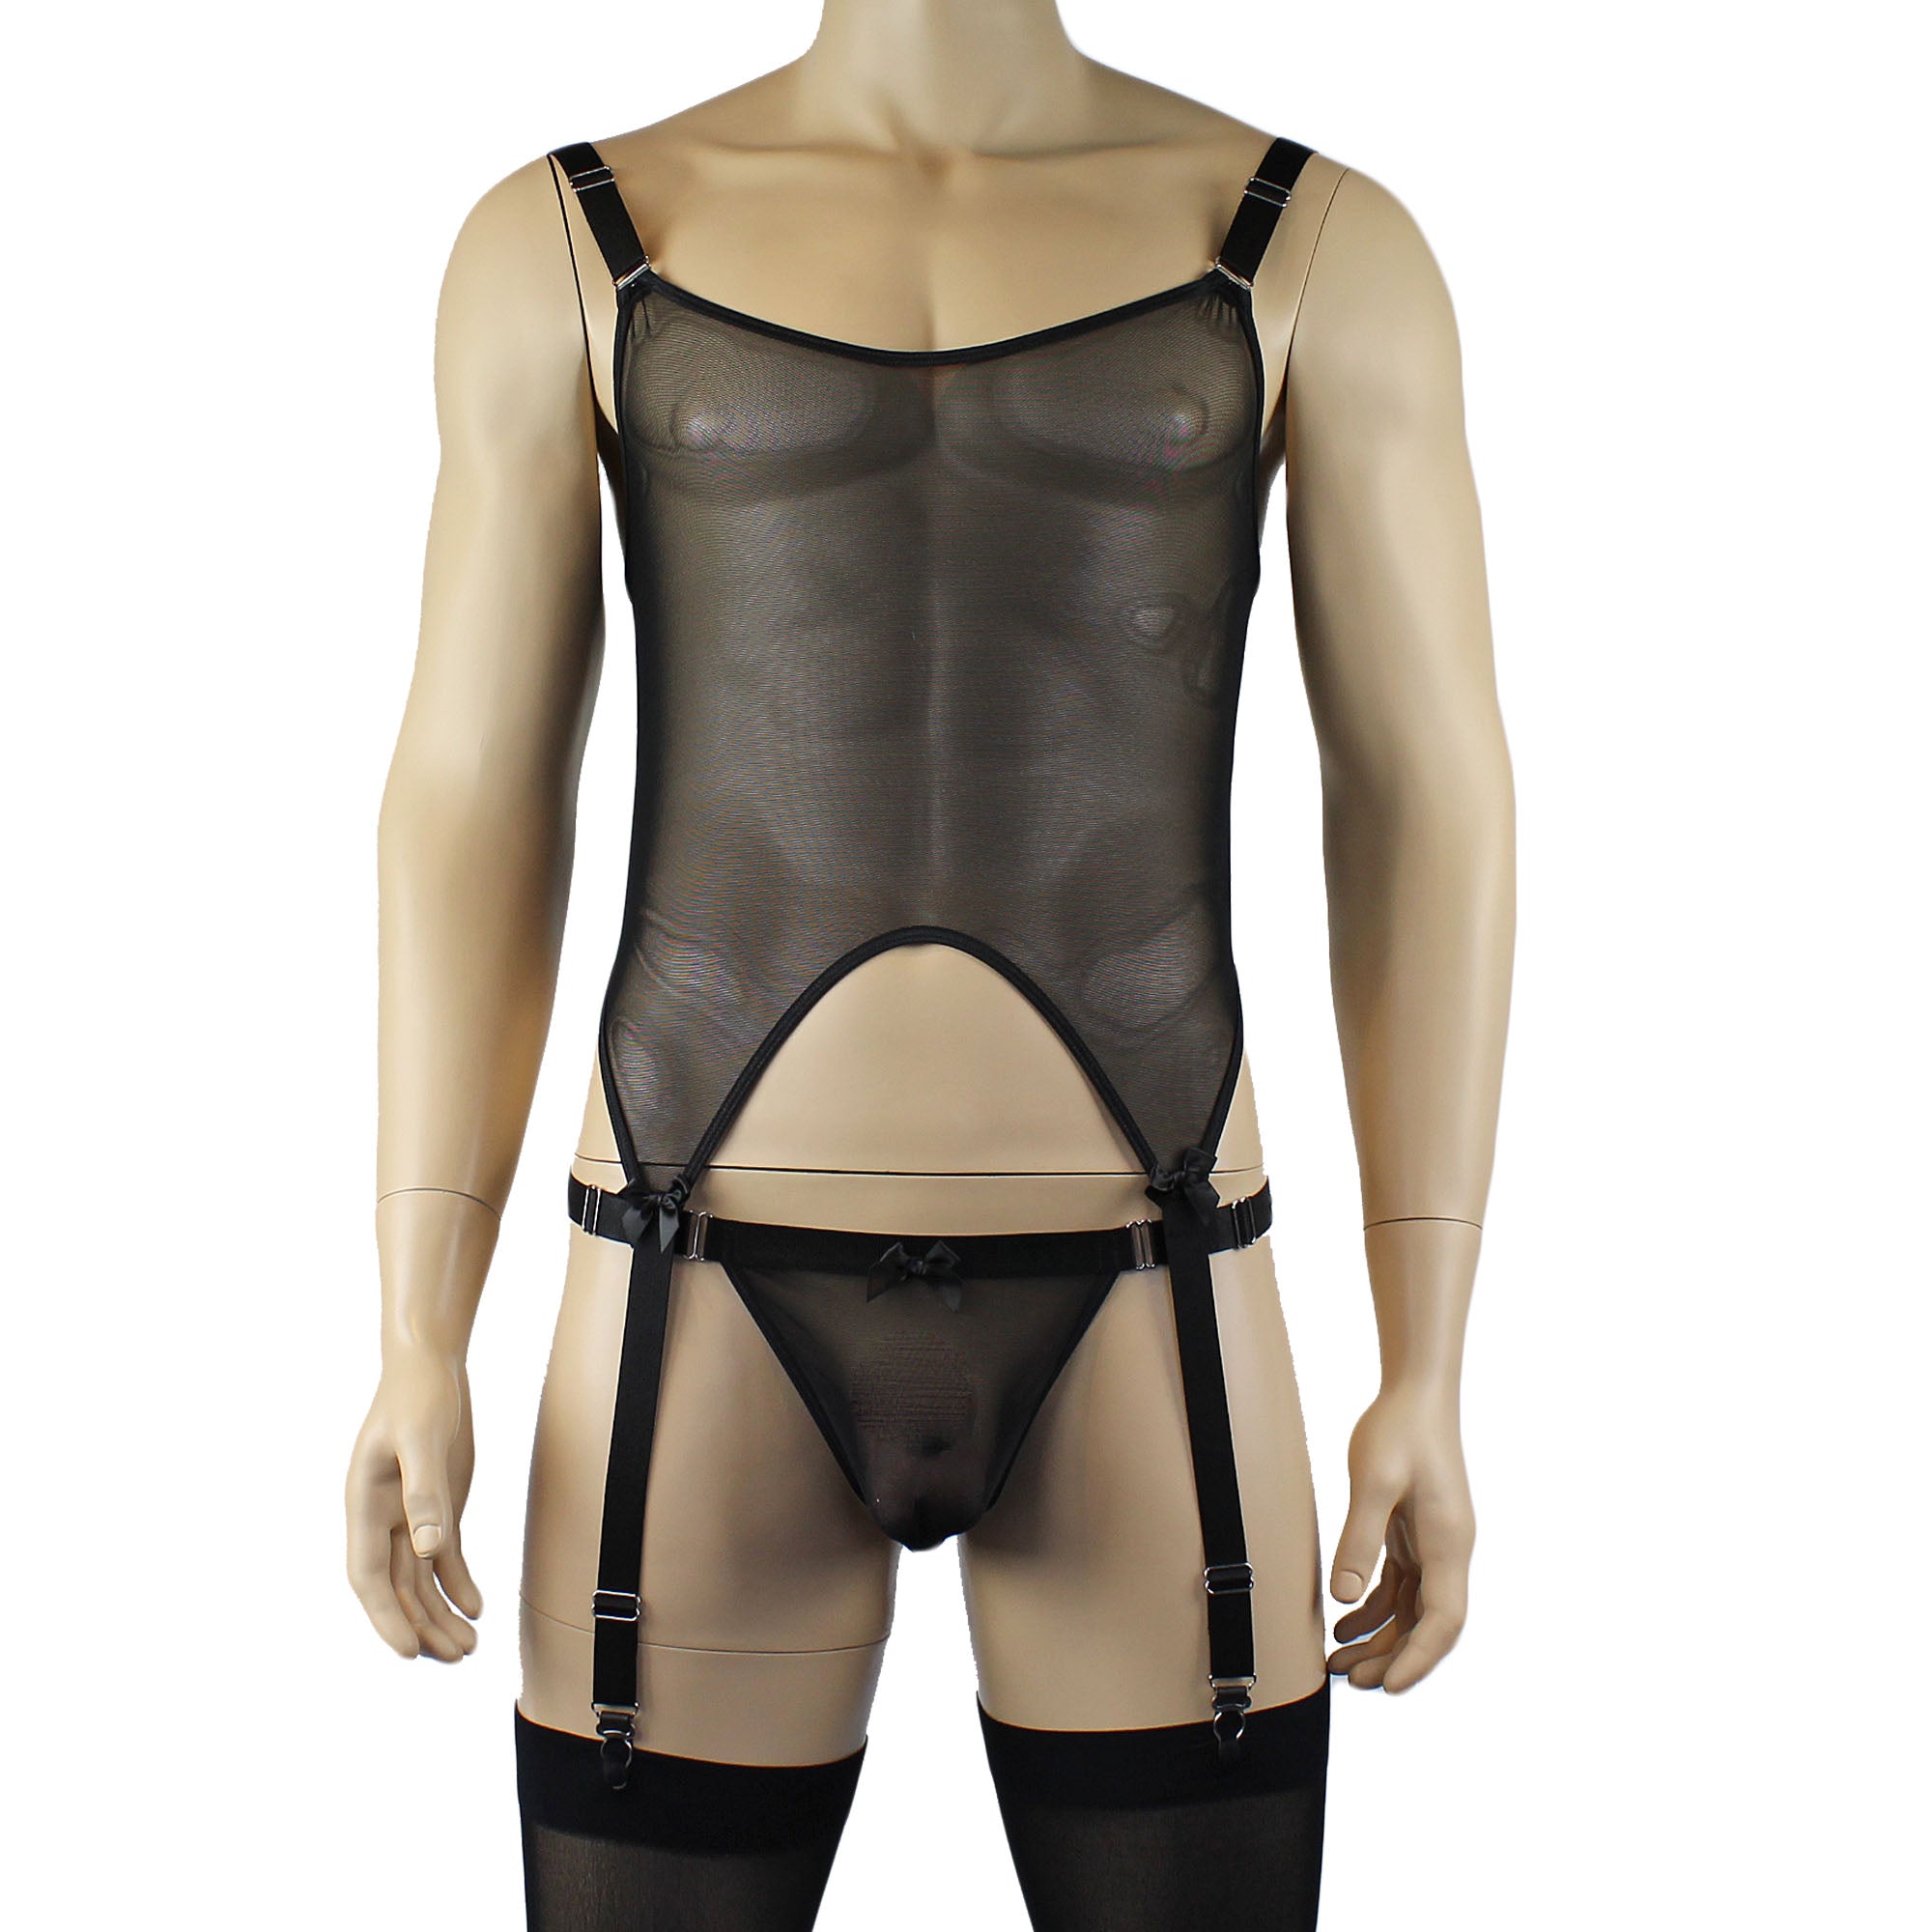 Mens Exotic Lingerie, Mesh Corset Top with Garters - Sizes up to 3XL Black